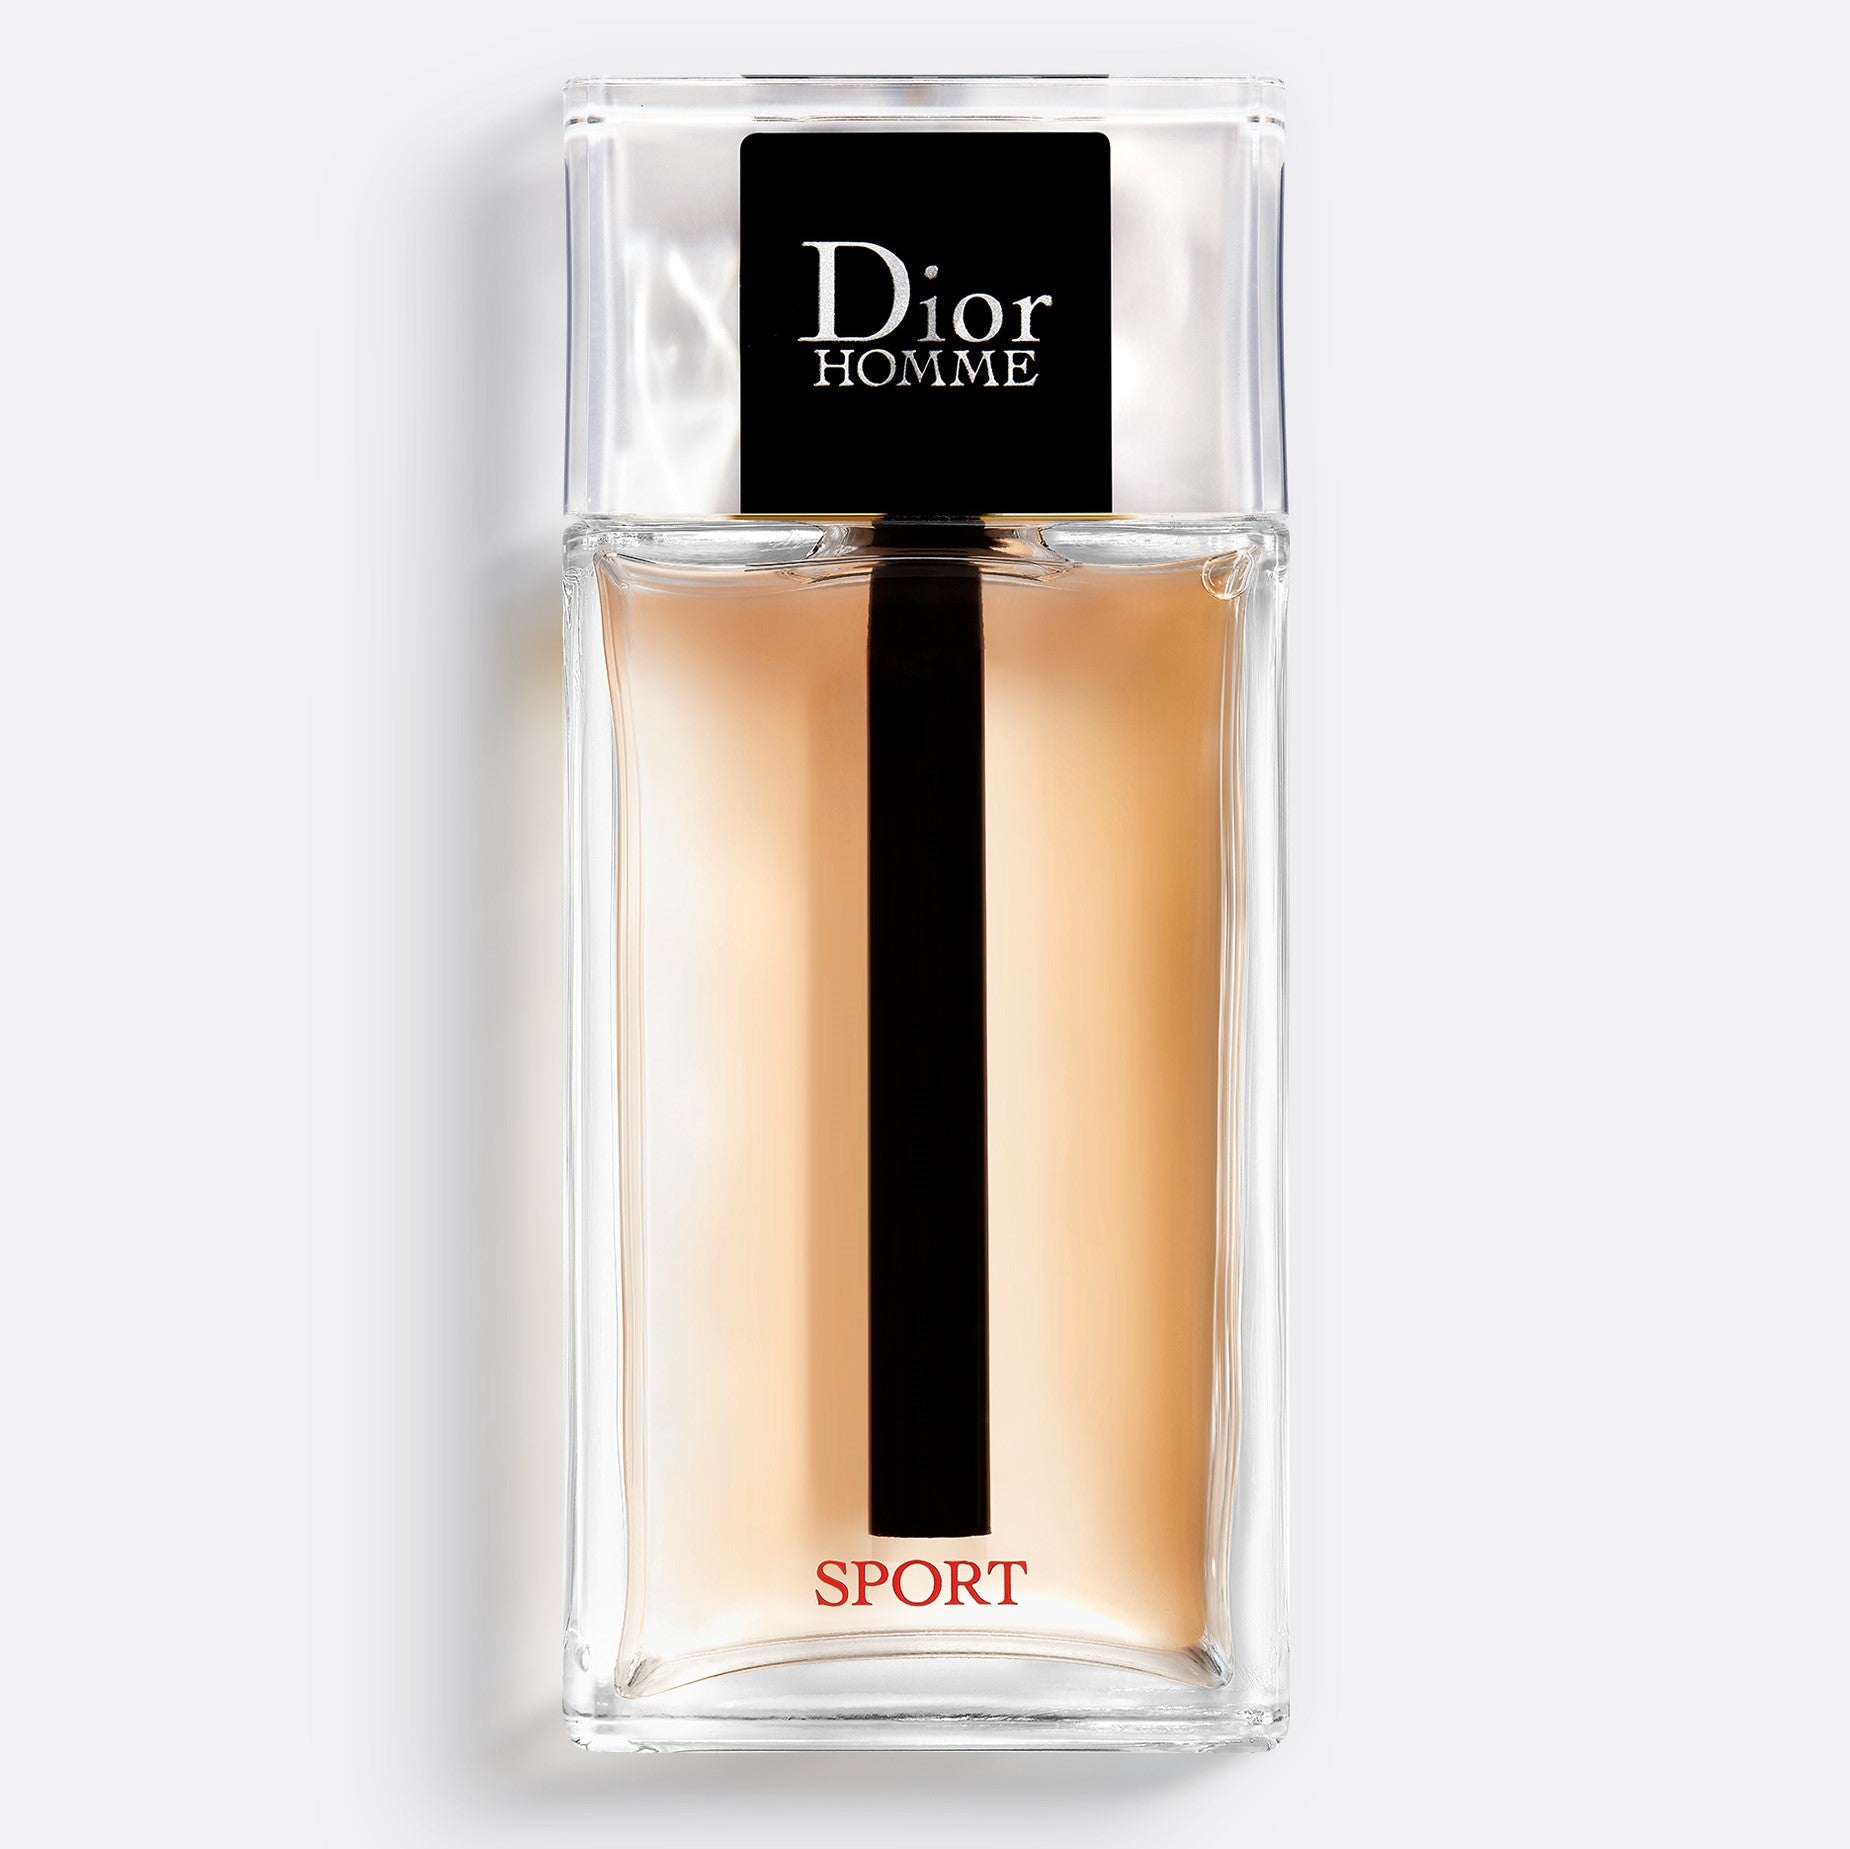 DIOR HOMME SPORT ~ Eau de toilette - fresh, woody and spicy notes